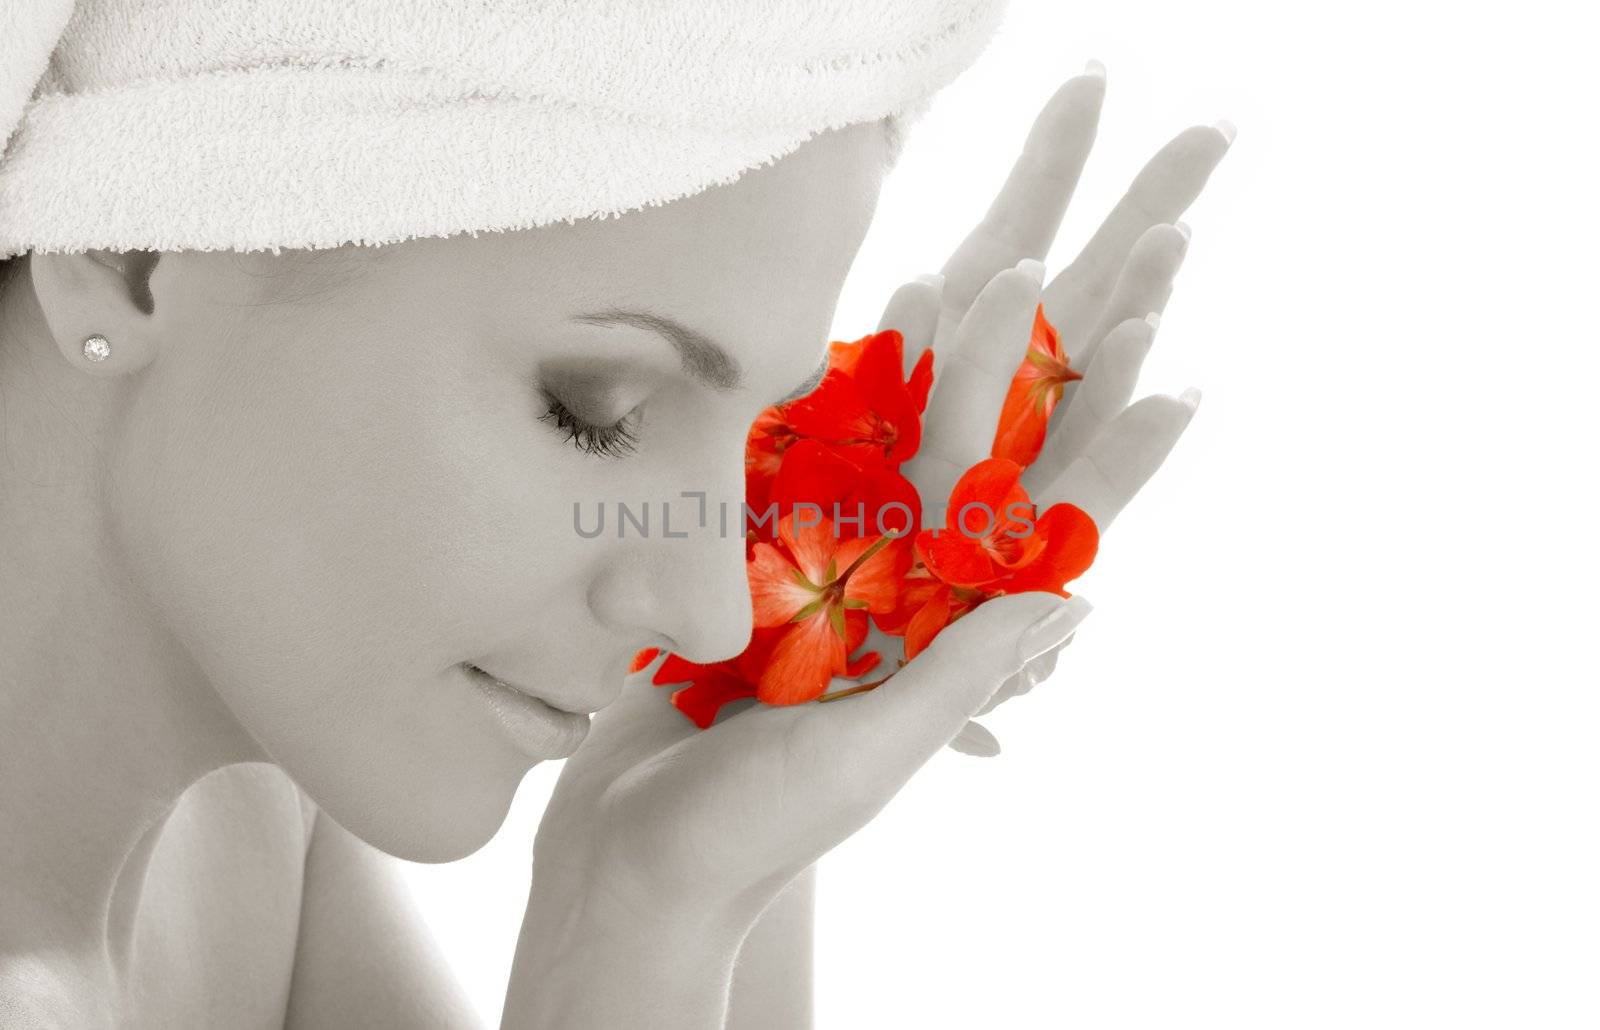 monochrome lady and red petals by dolgachov